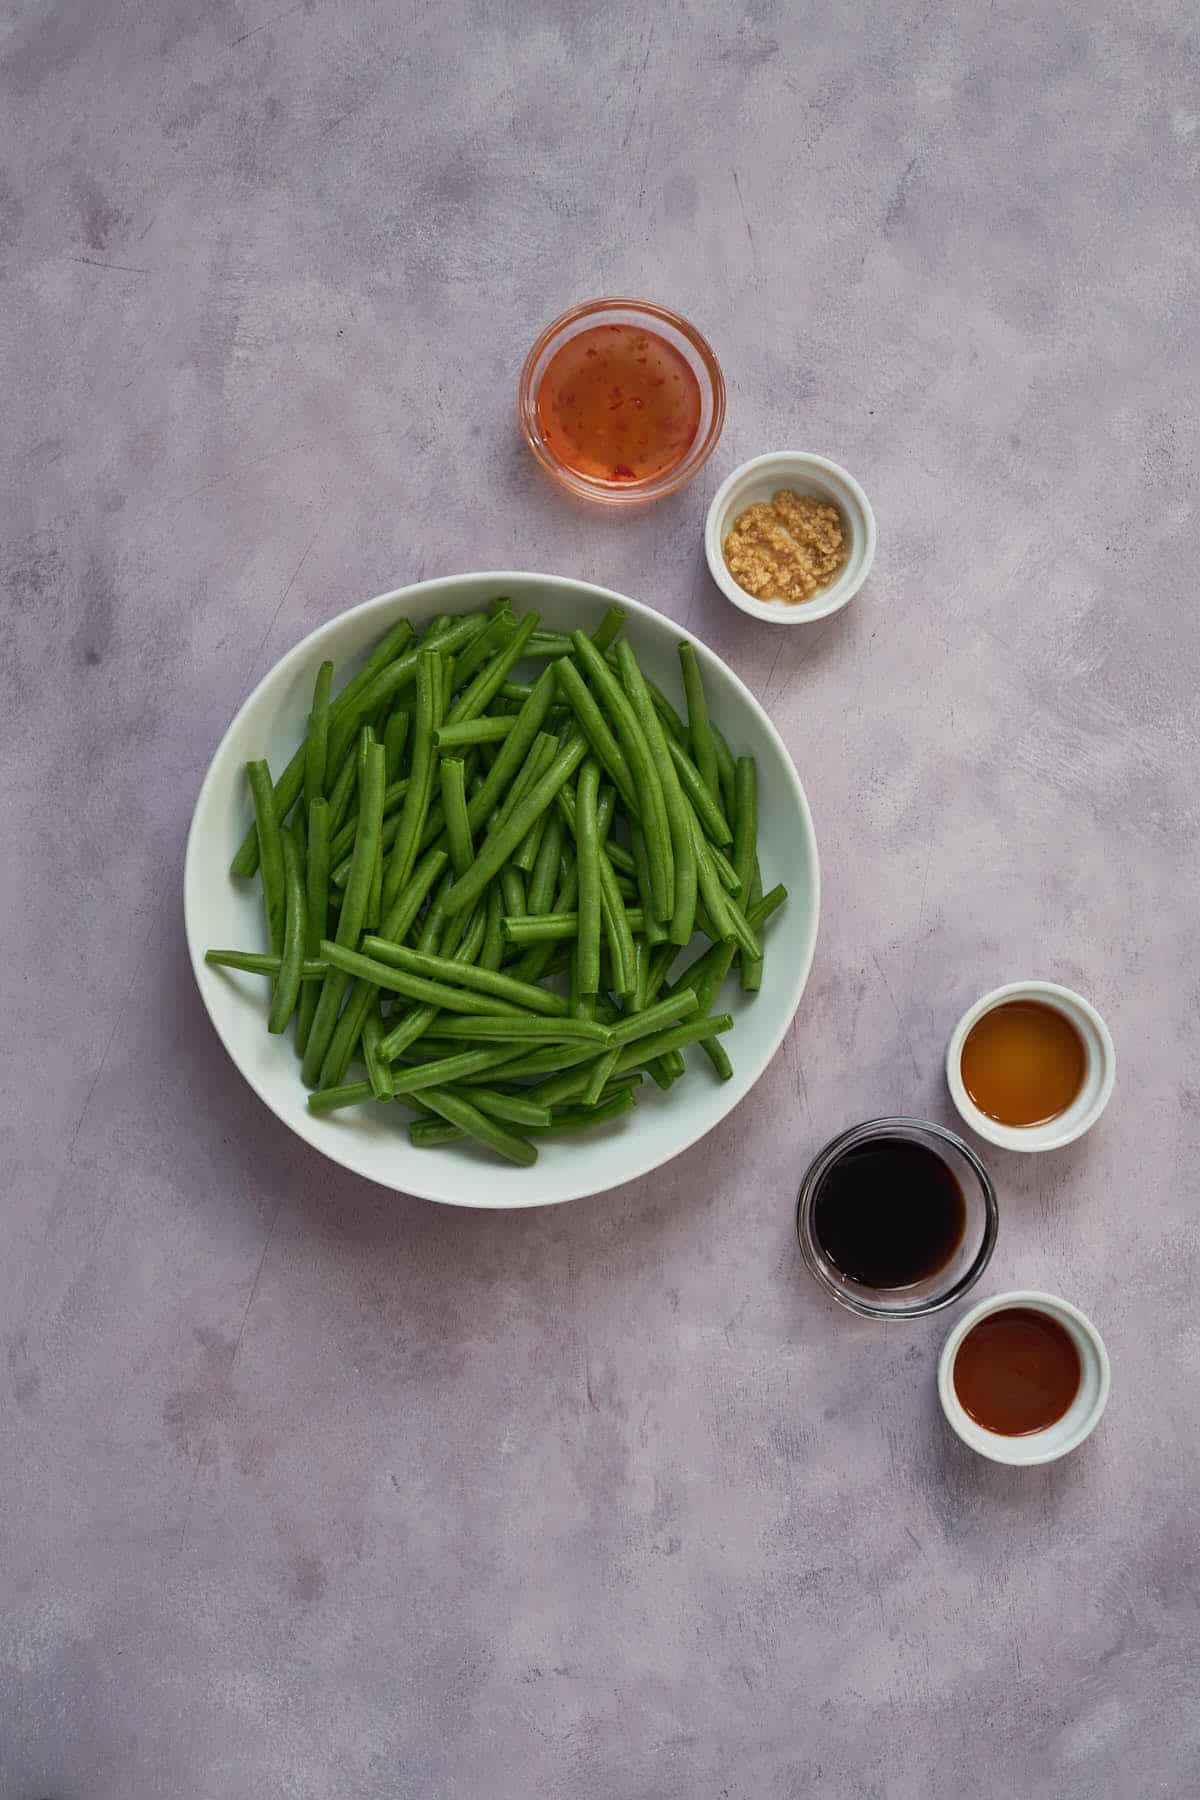 Ingredients to make spicy air fryer green beans.